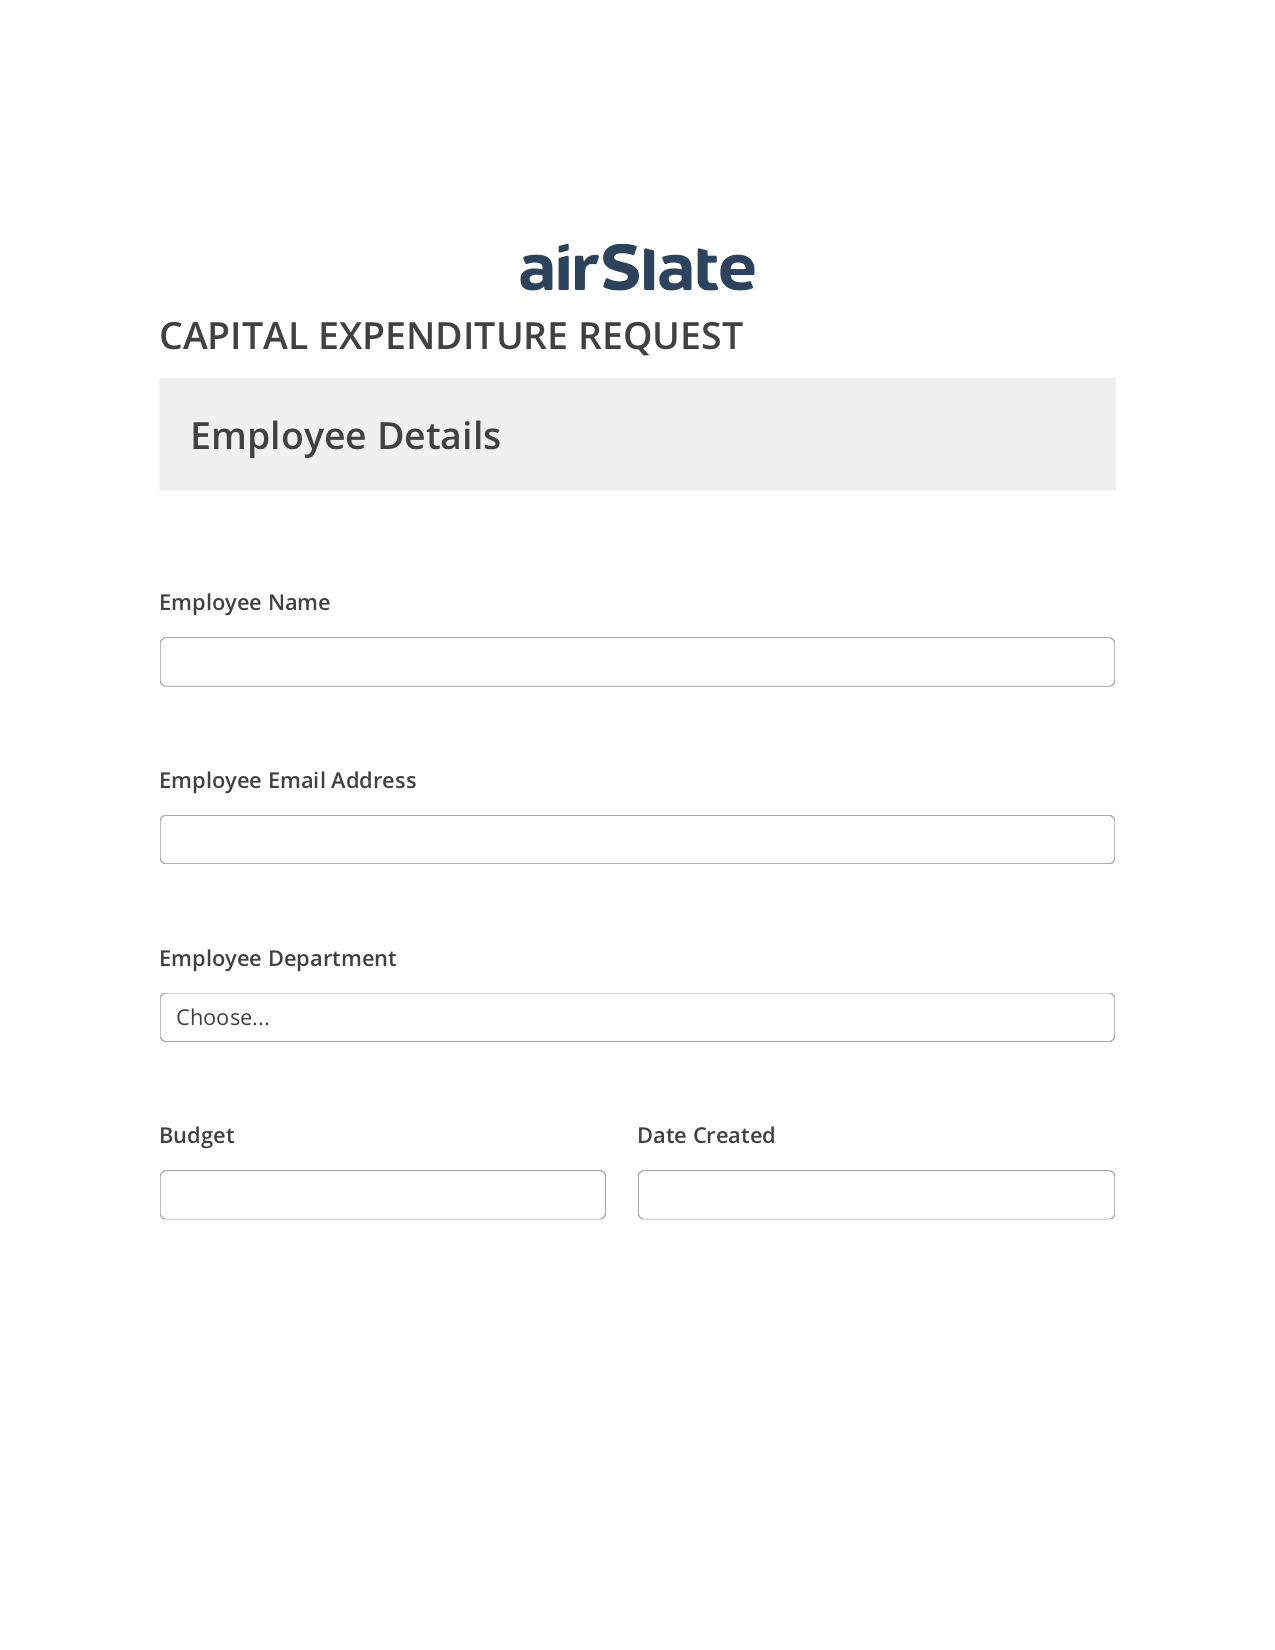 Capital Expenditure Request Approval Workflow Prefill from NetSuite records, Lock the Slate Bot, Text Message Notification Postfinish